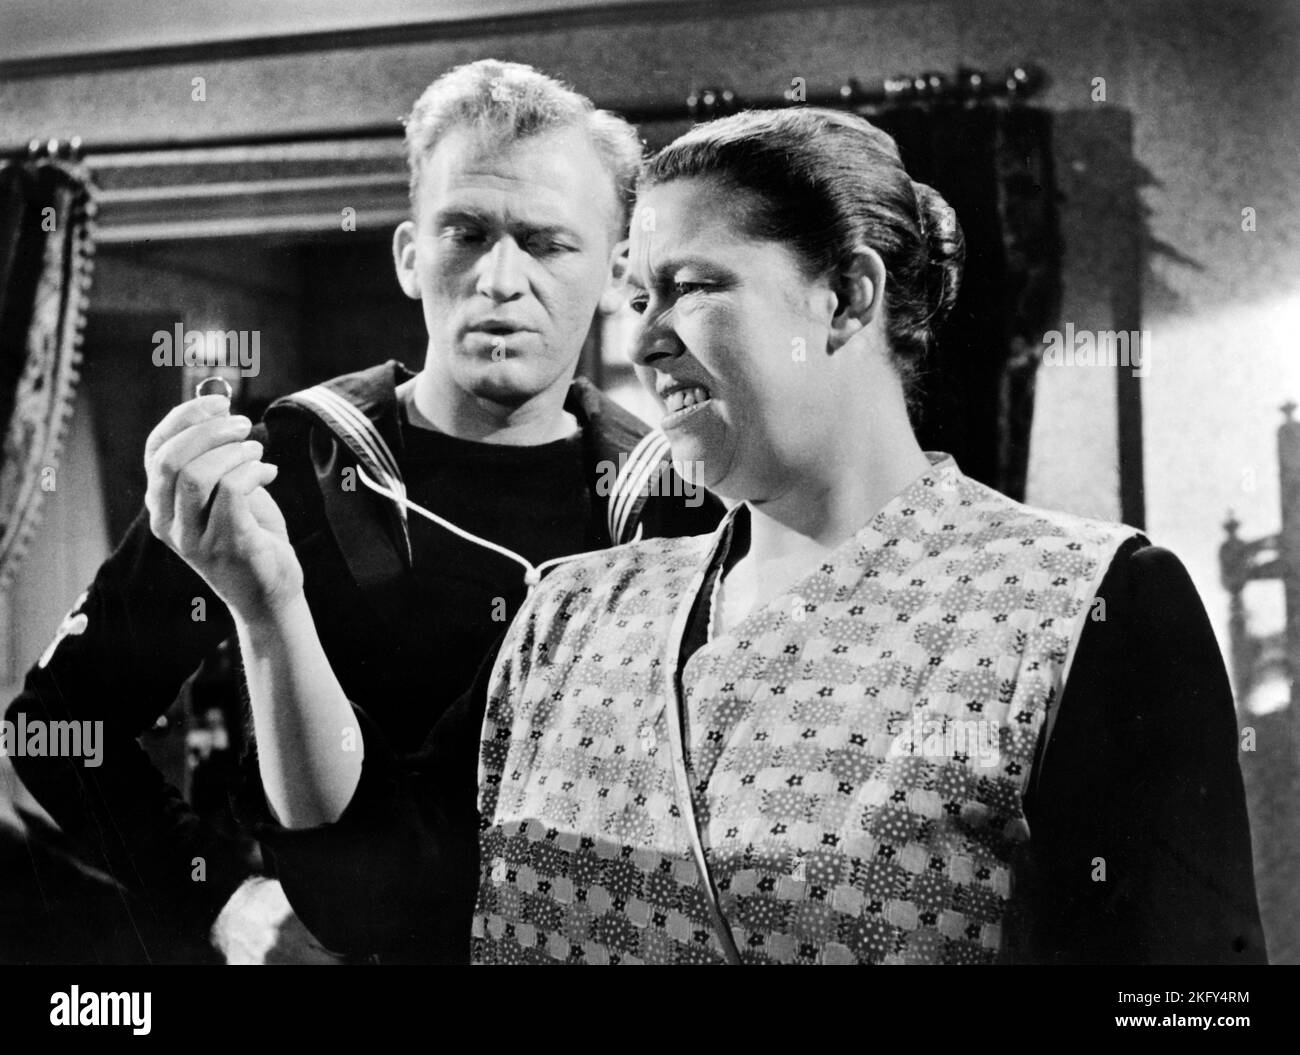 Gordon Jackson, Peggy Mount, on-set of the British Film, 'Sailor Beware!', U.S. Title: 'Panic In The Parlor, Independent Film Distributors, 1956 Stock Photo